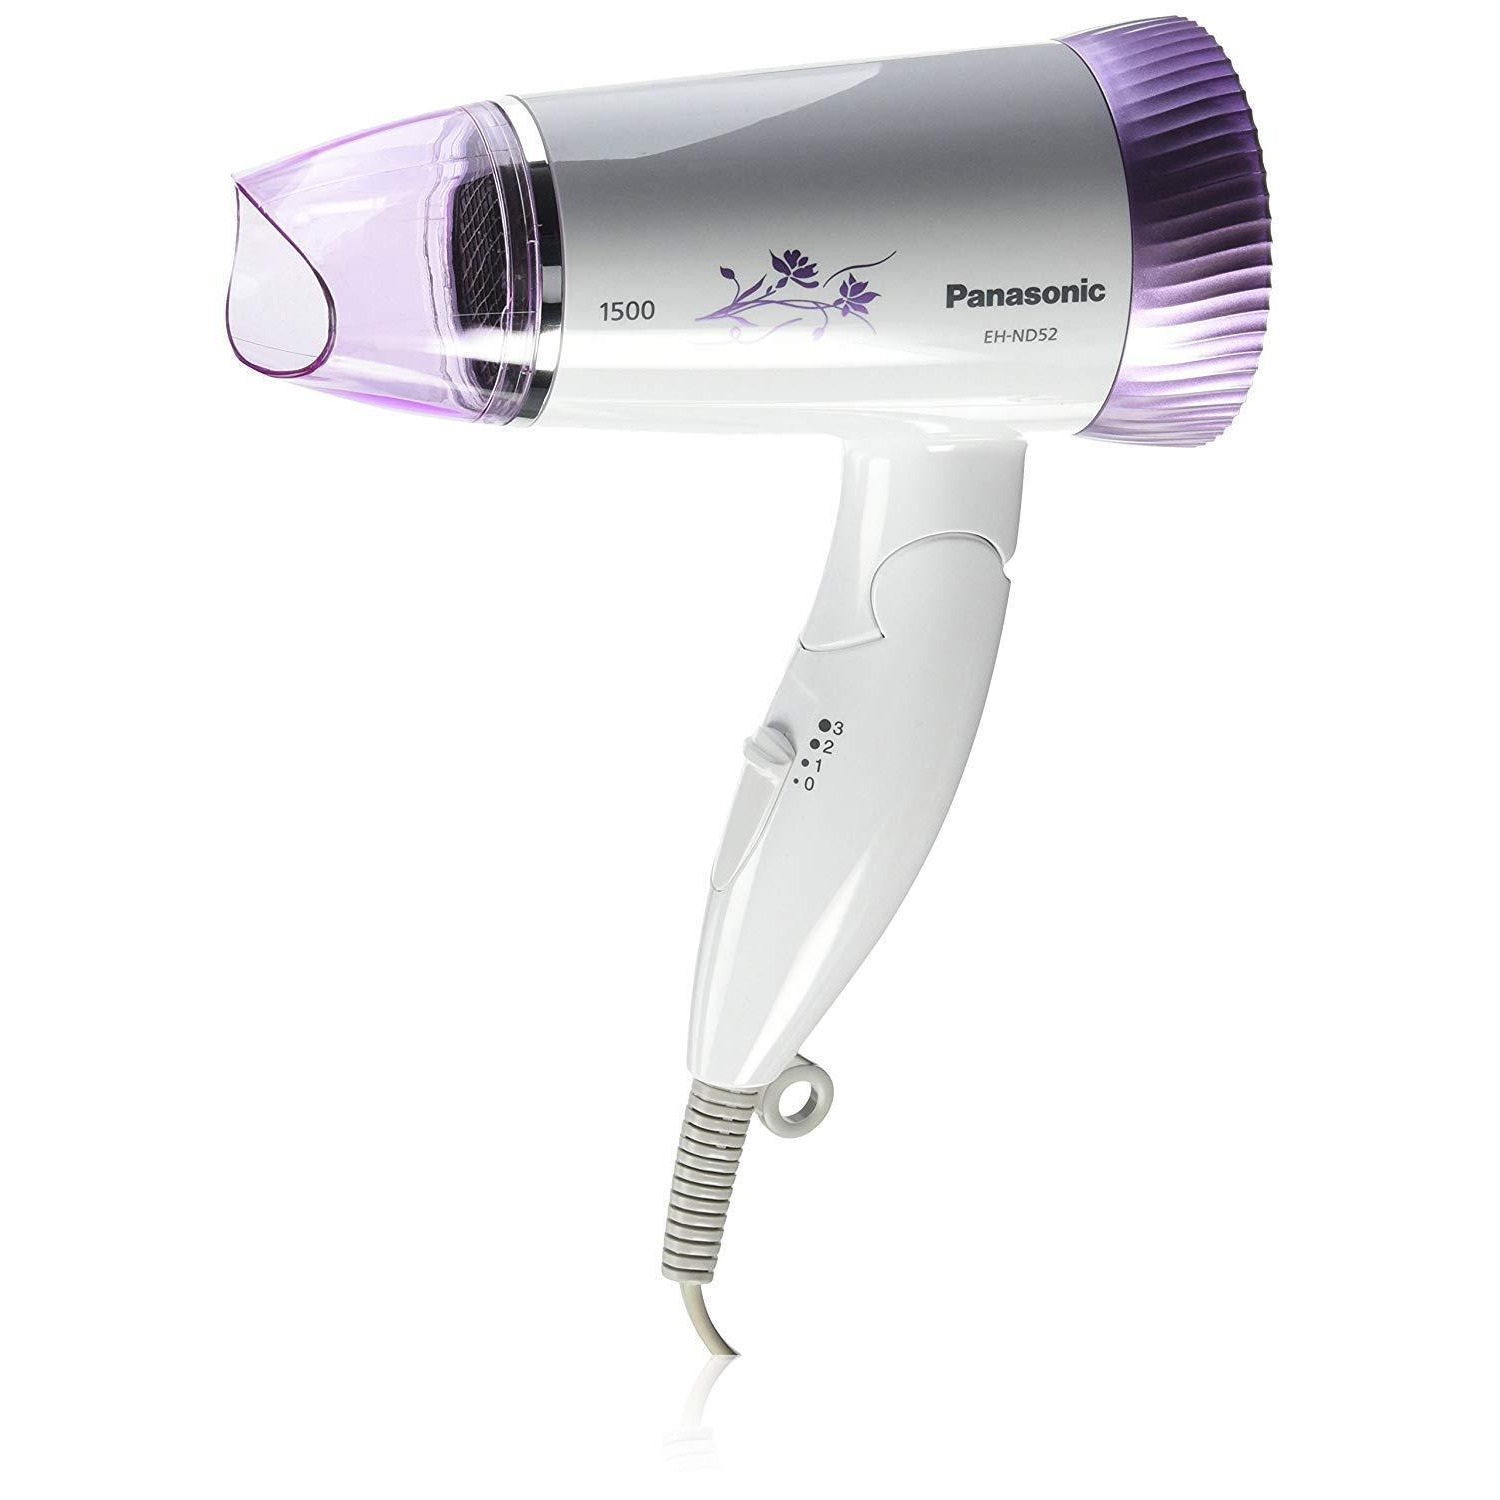 Panasonic 1500 Watts Powerful Hair Dryer EH-ND52-v 220 Volts NOT FOR USA